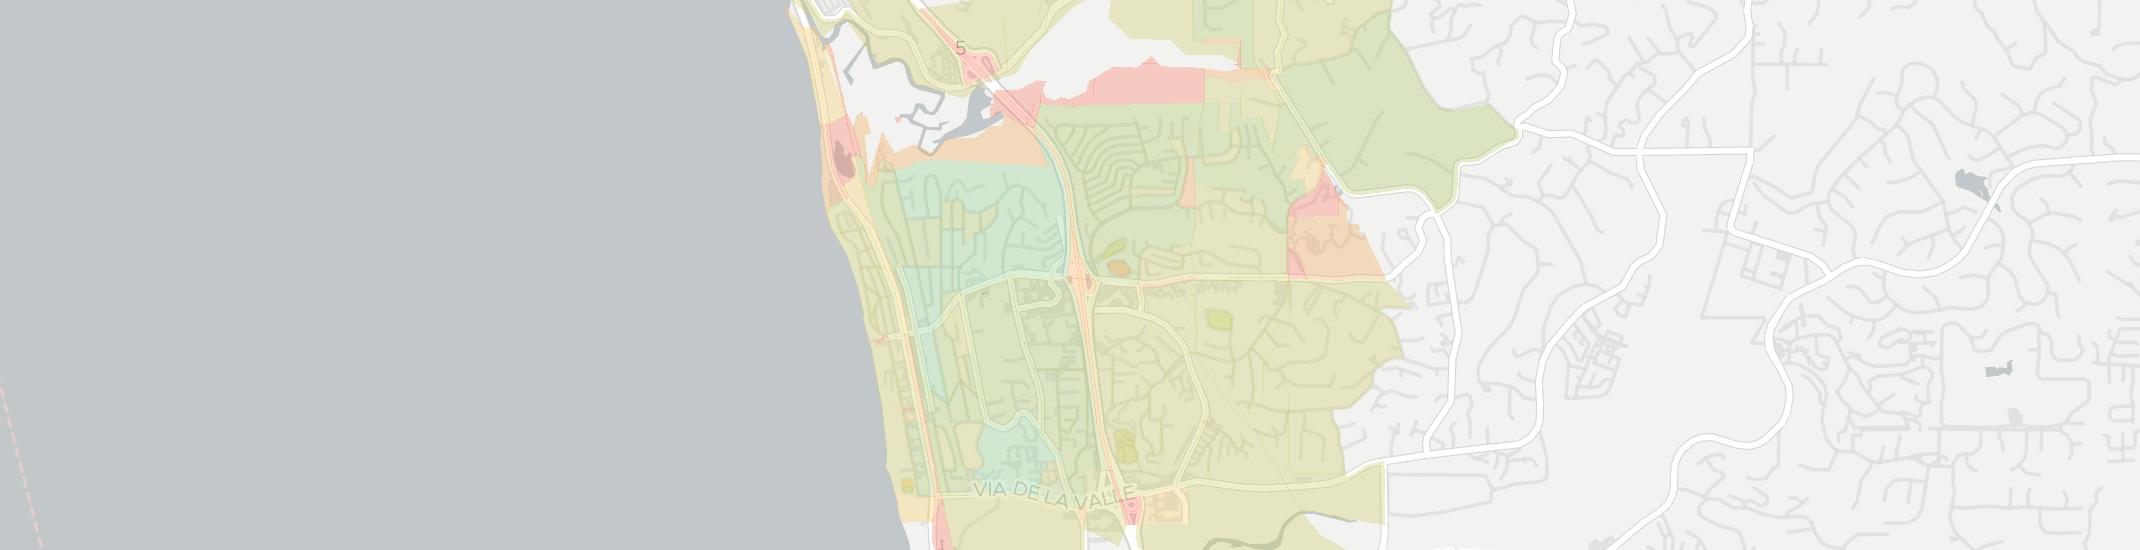 Solana Beach Internet Competition Map. Click for interactive map.